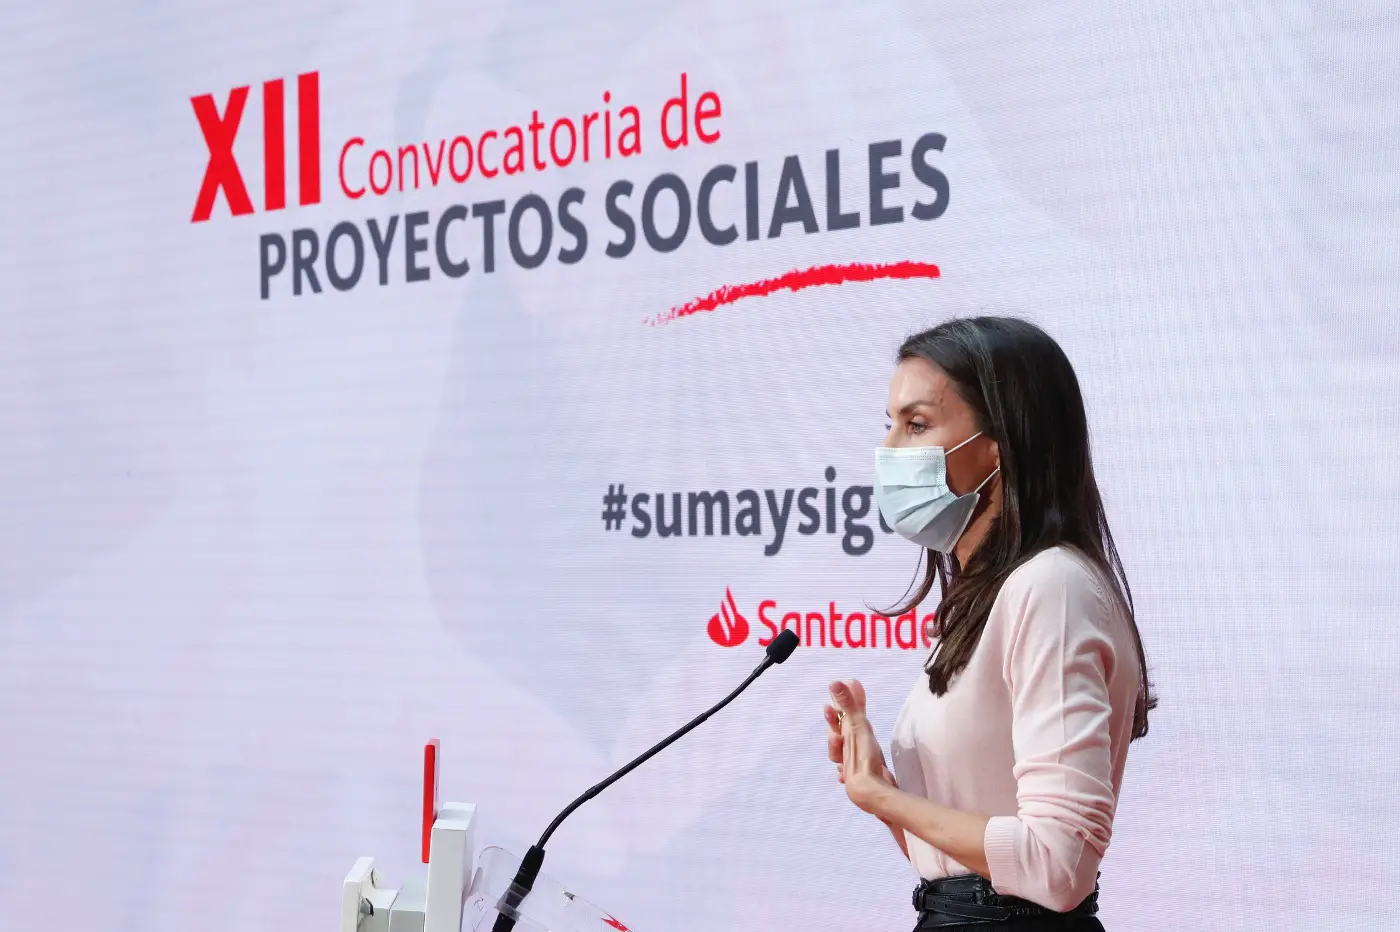 Queen Letizia of Spain presided over the closing ceremony of the XII Call for Social Projects of Banco Santander at its headquarter